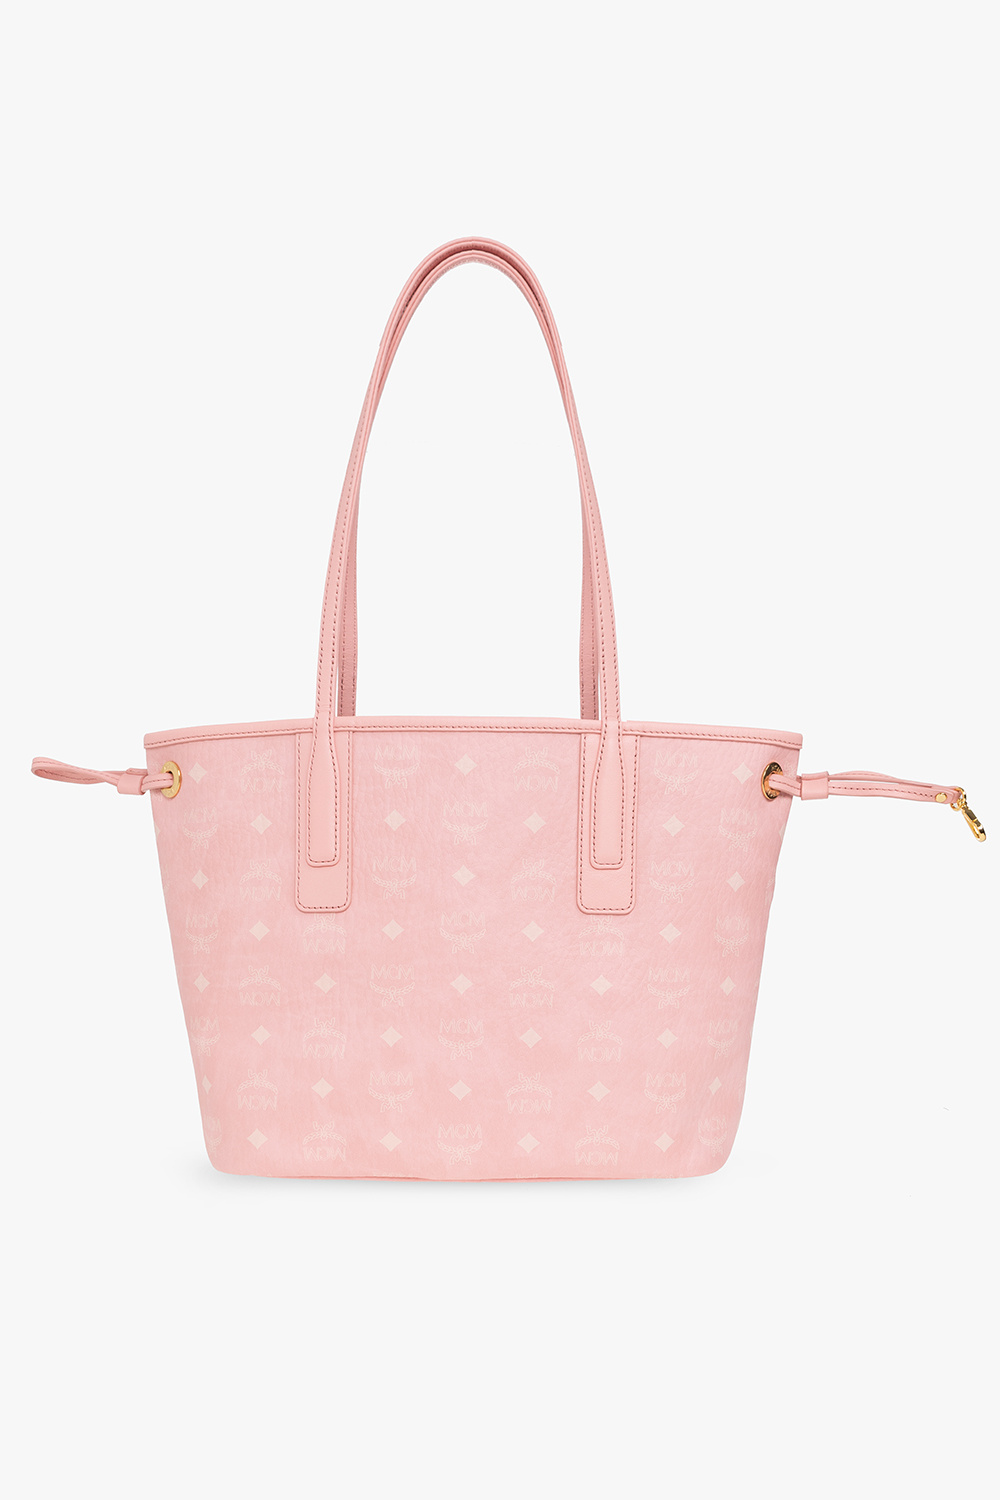 MCM Handbag White w/ Pink Bow – Couture Collection Closet